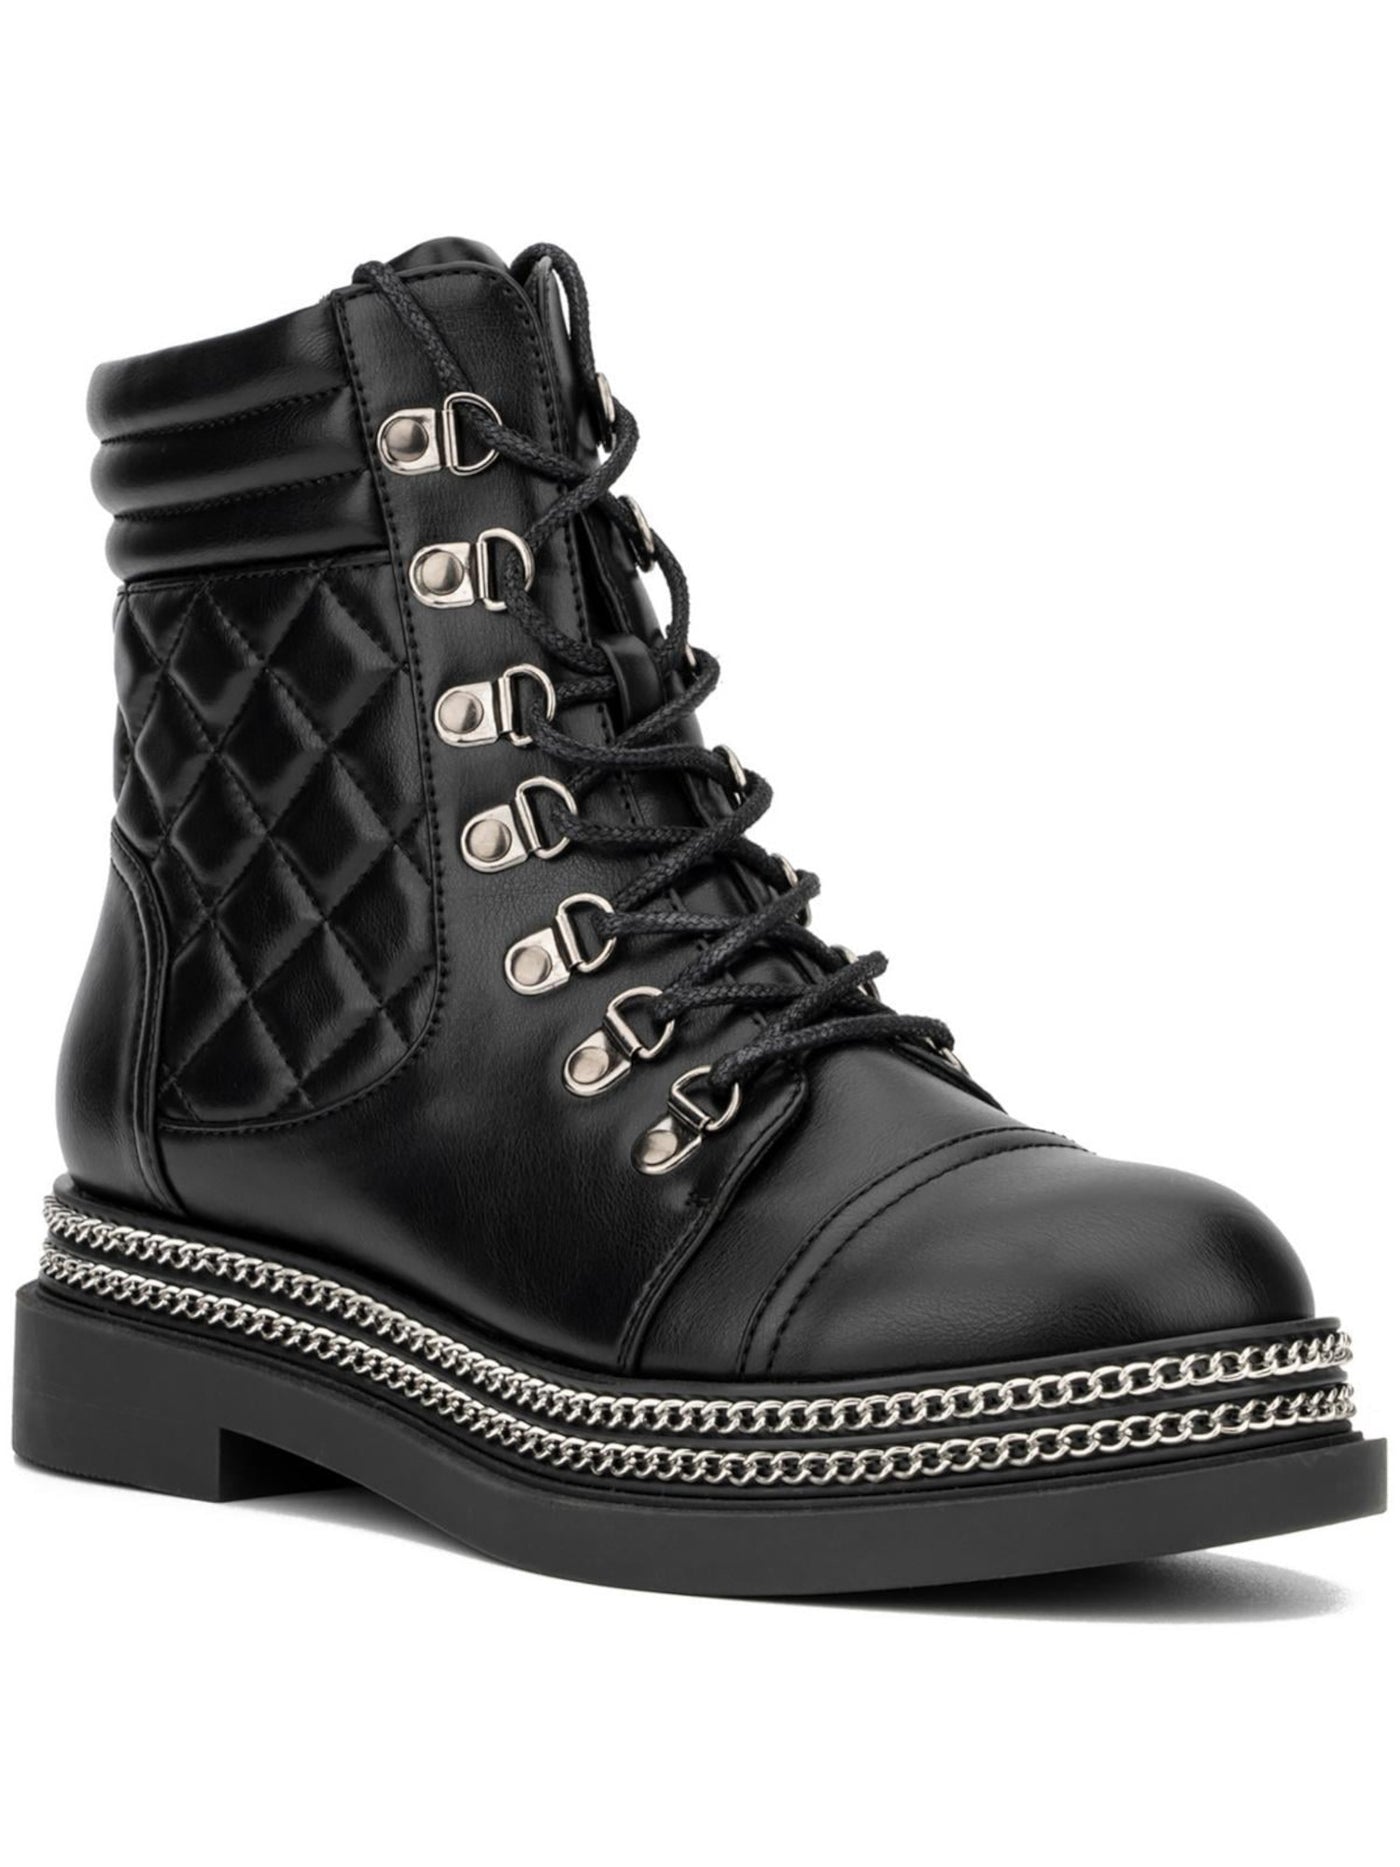 NEW YORK & CO Womens Black Quilted Back Chain Detail Lace Up Padded Cuff Padded Katelynn Round Toe Block Heel Zip-Up Combat Boots 10